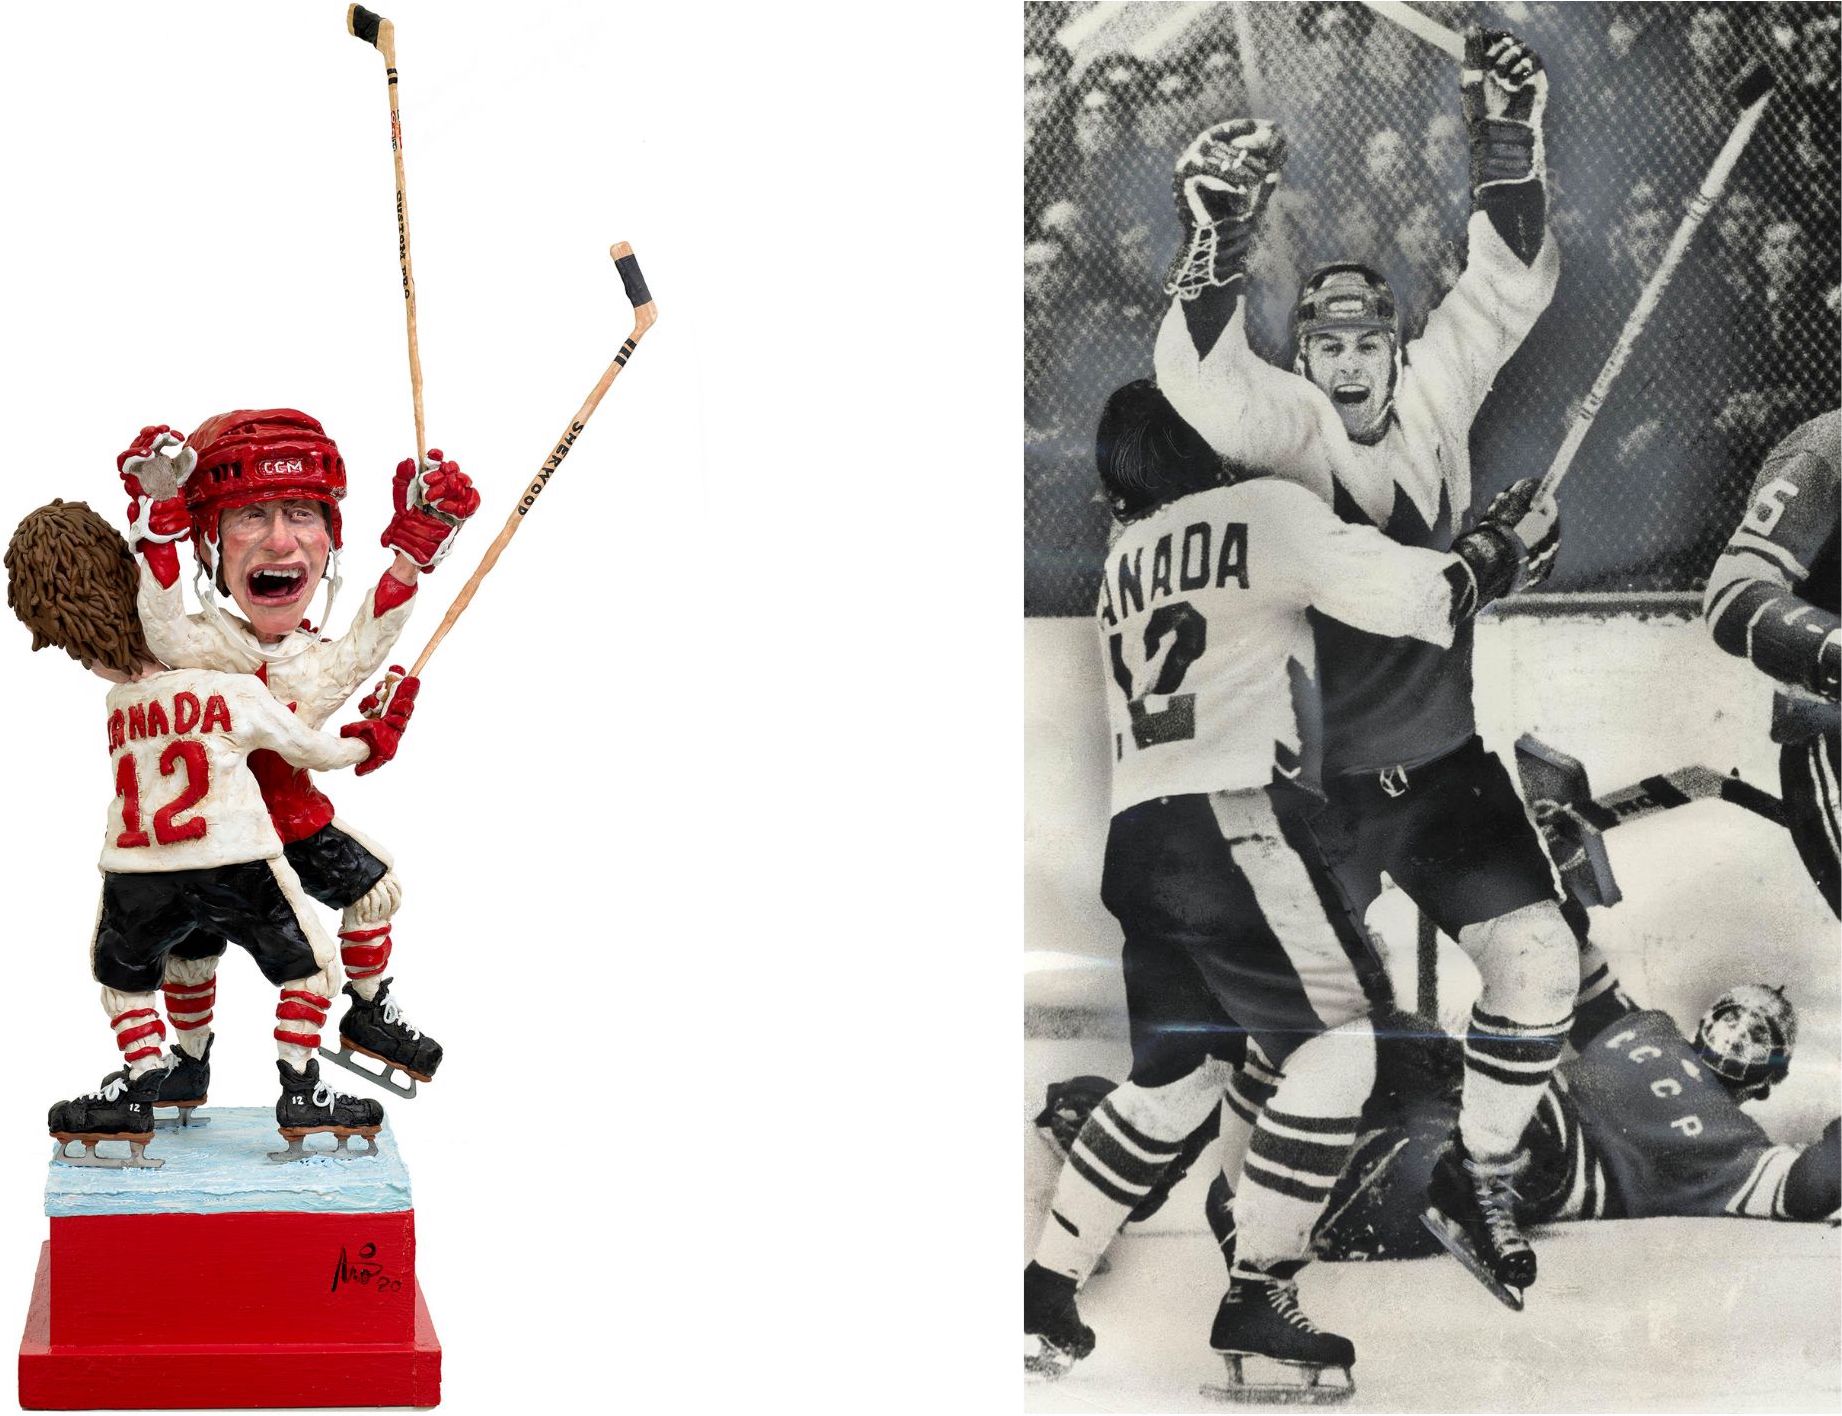 Two images shown - one a colourful sculpture of two hockey players celebrating; the second a black and white photograph of the same two hockey players celebrating